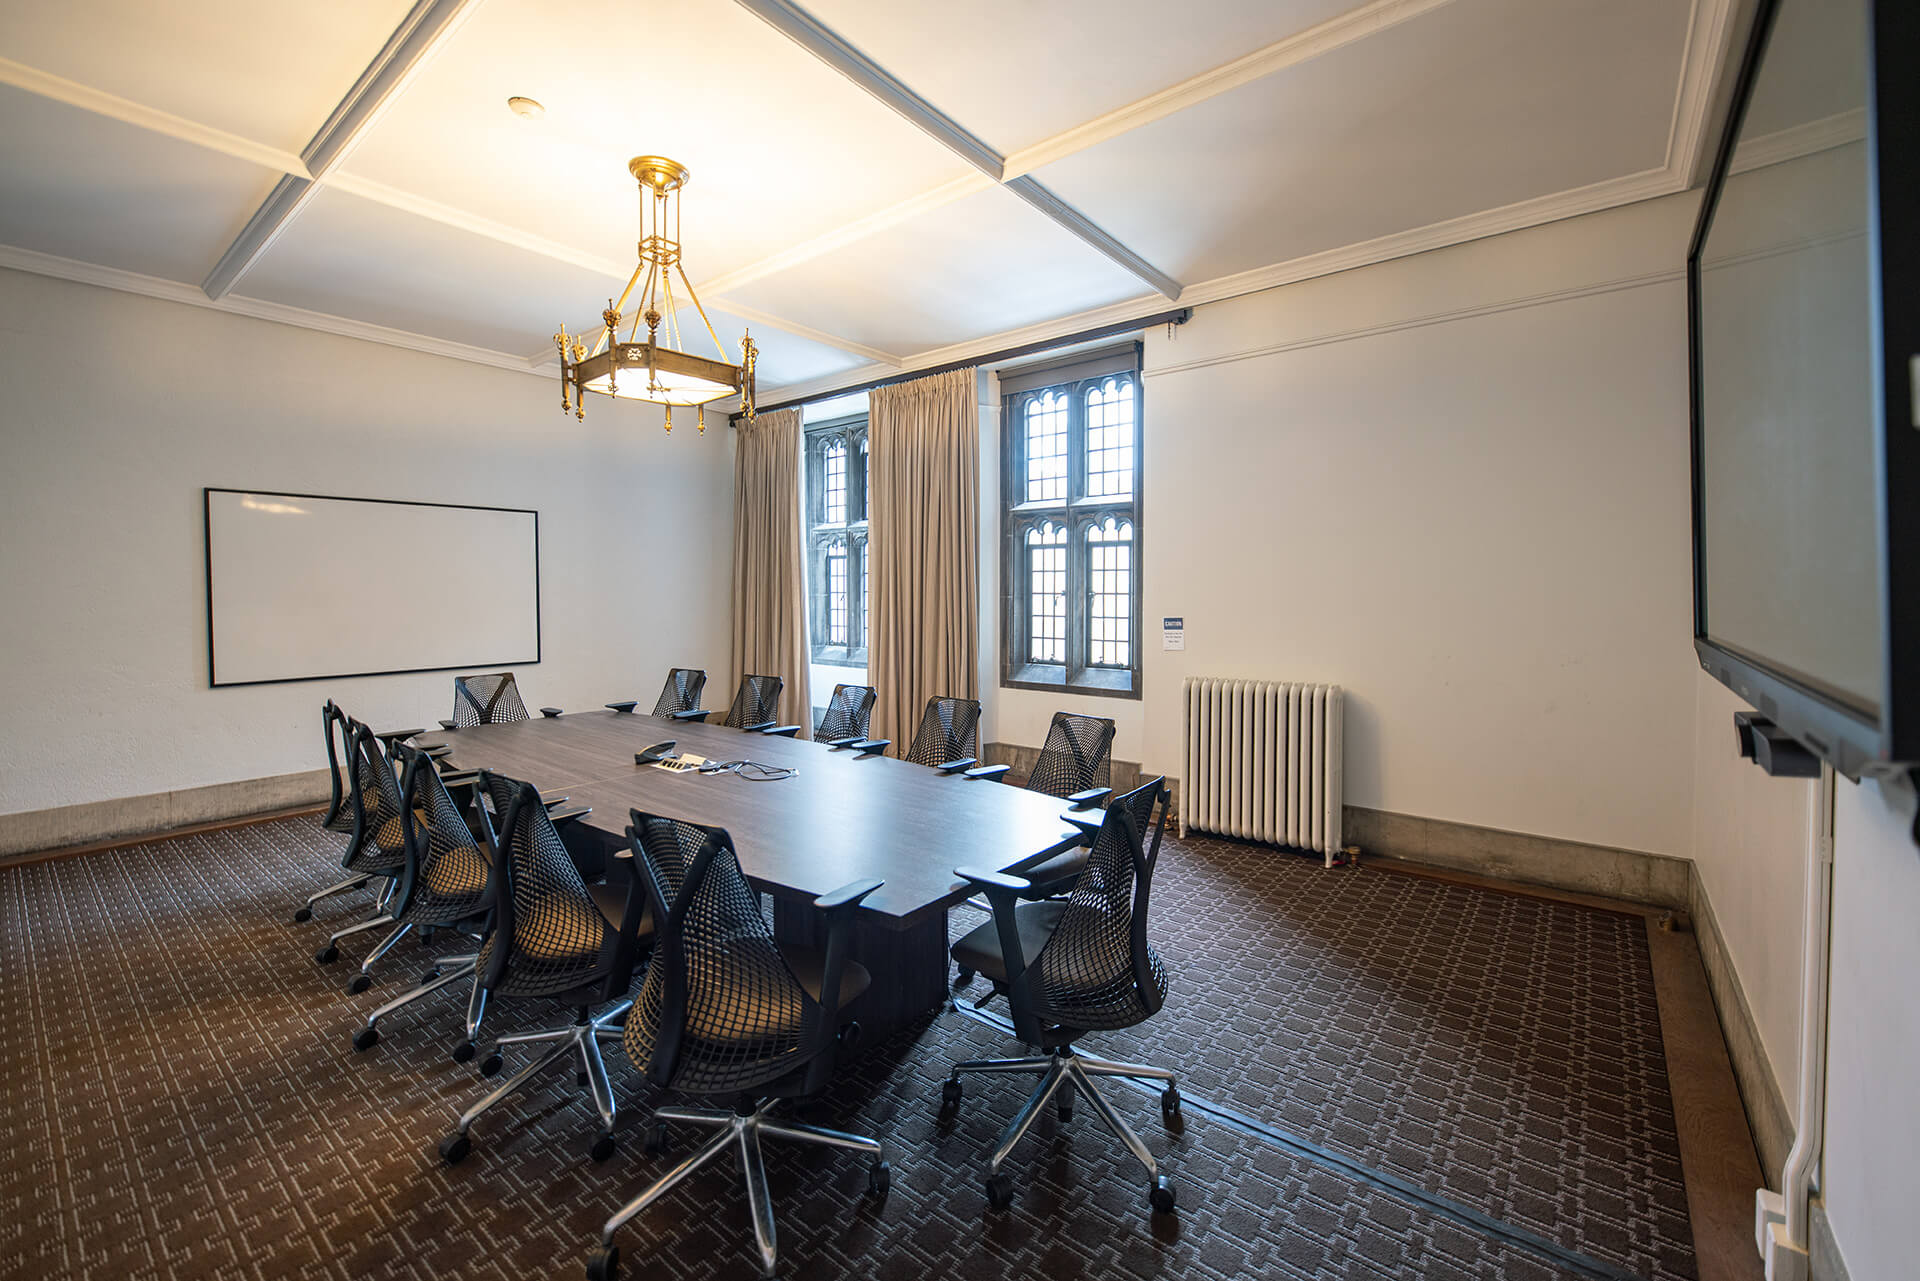 A large board table, comfortable chairs and a flatscreen with video conference capabilities.